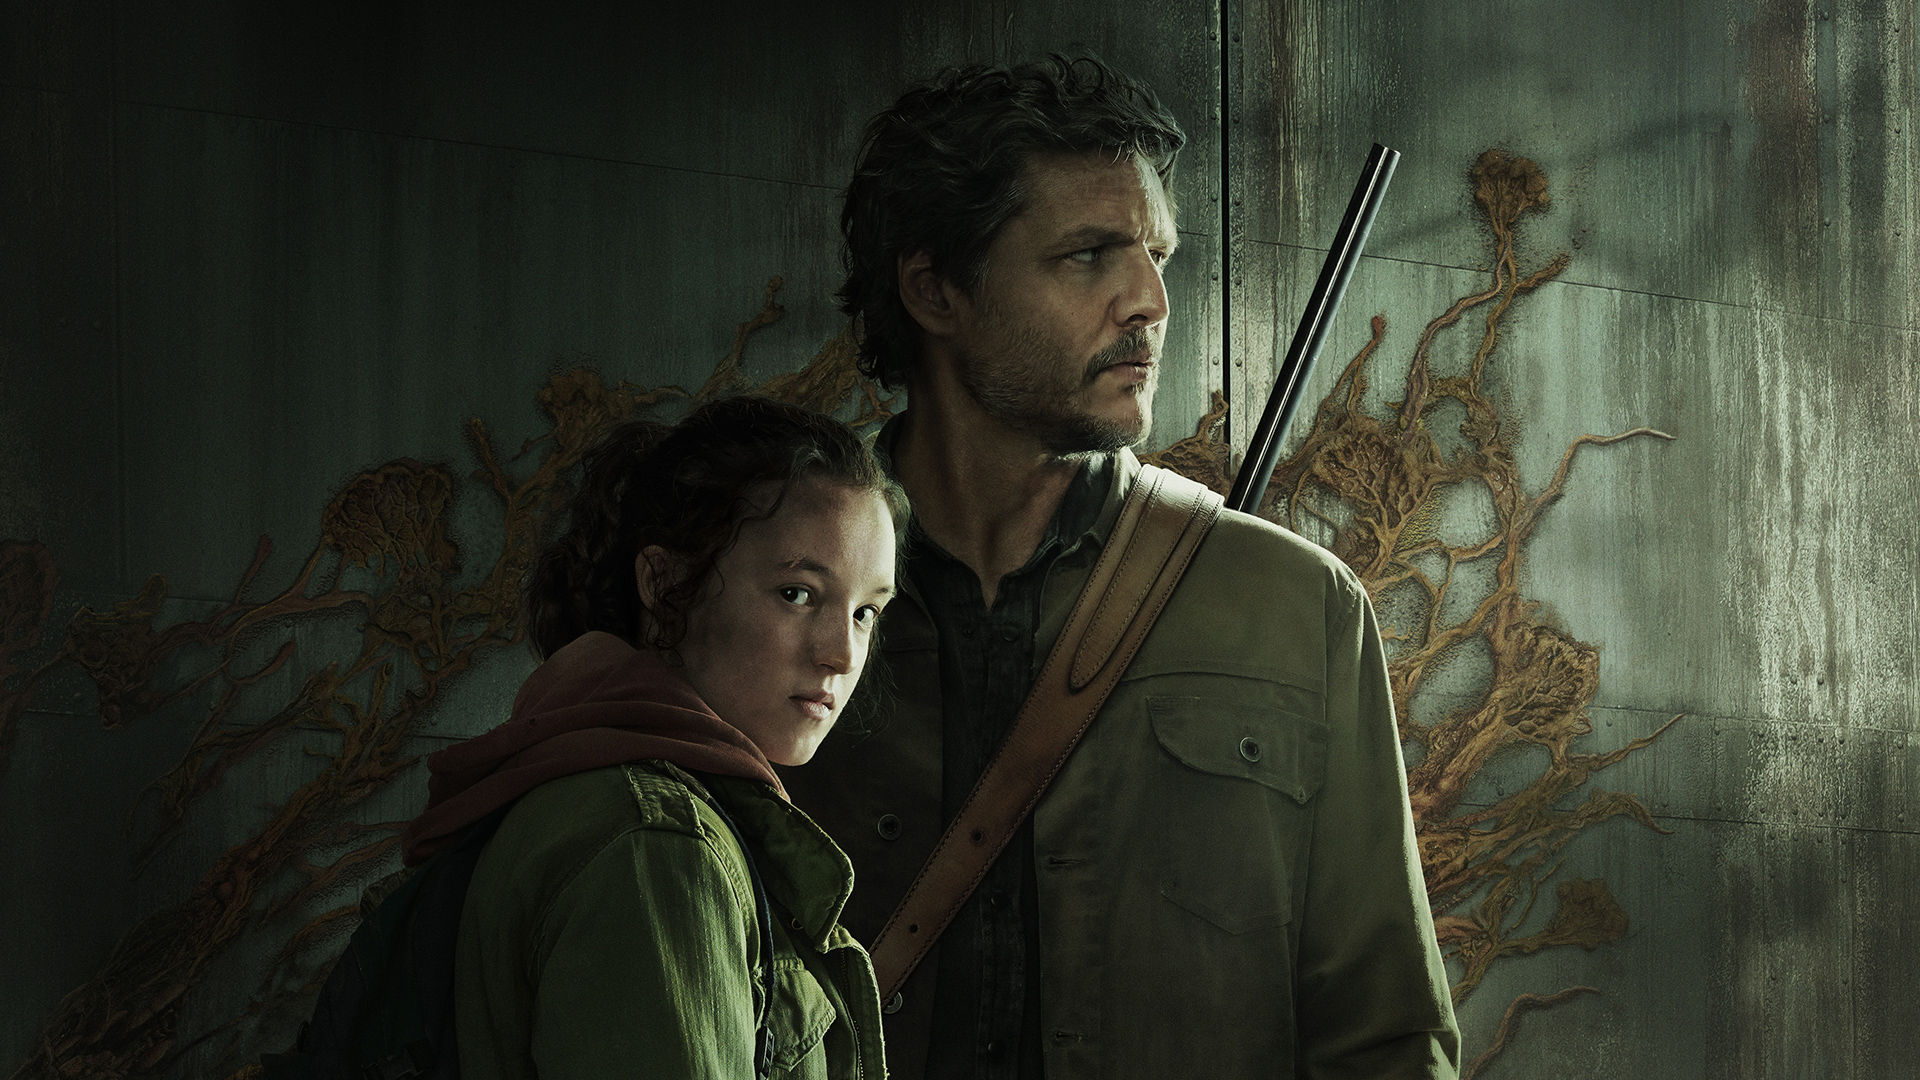 Last of Us' episode 5 review: The HBO drama demonstrates its